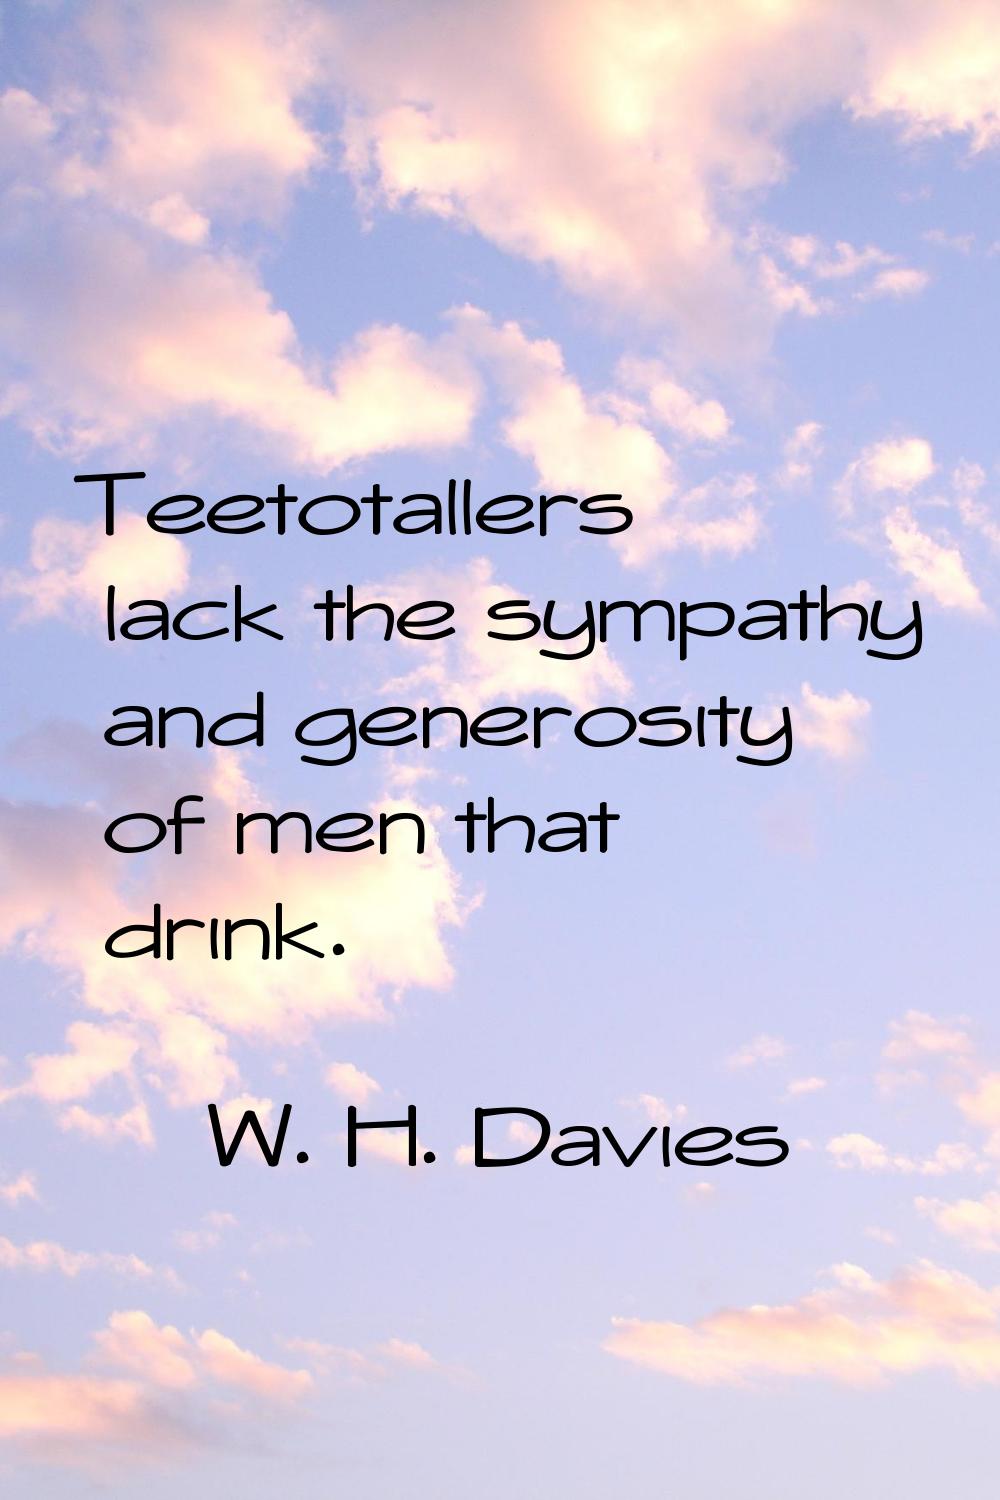 Teetotallers lack the sympathy and generosity of men that drink.